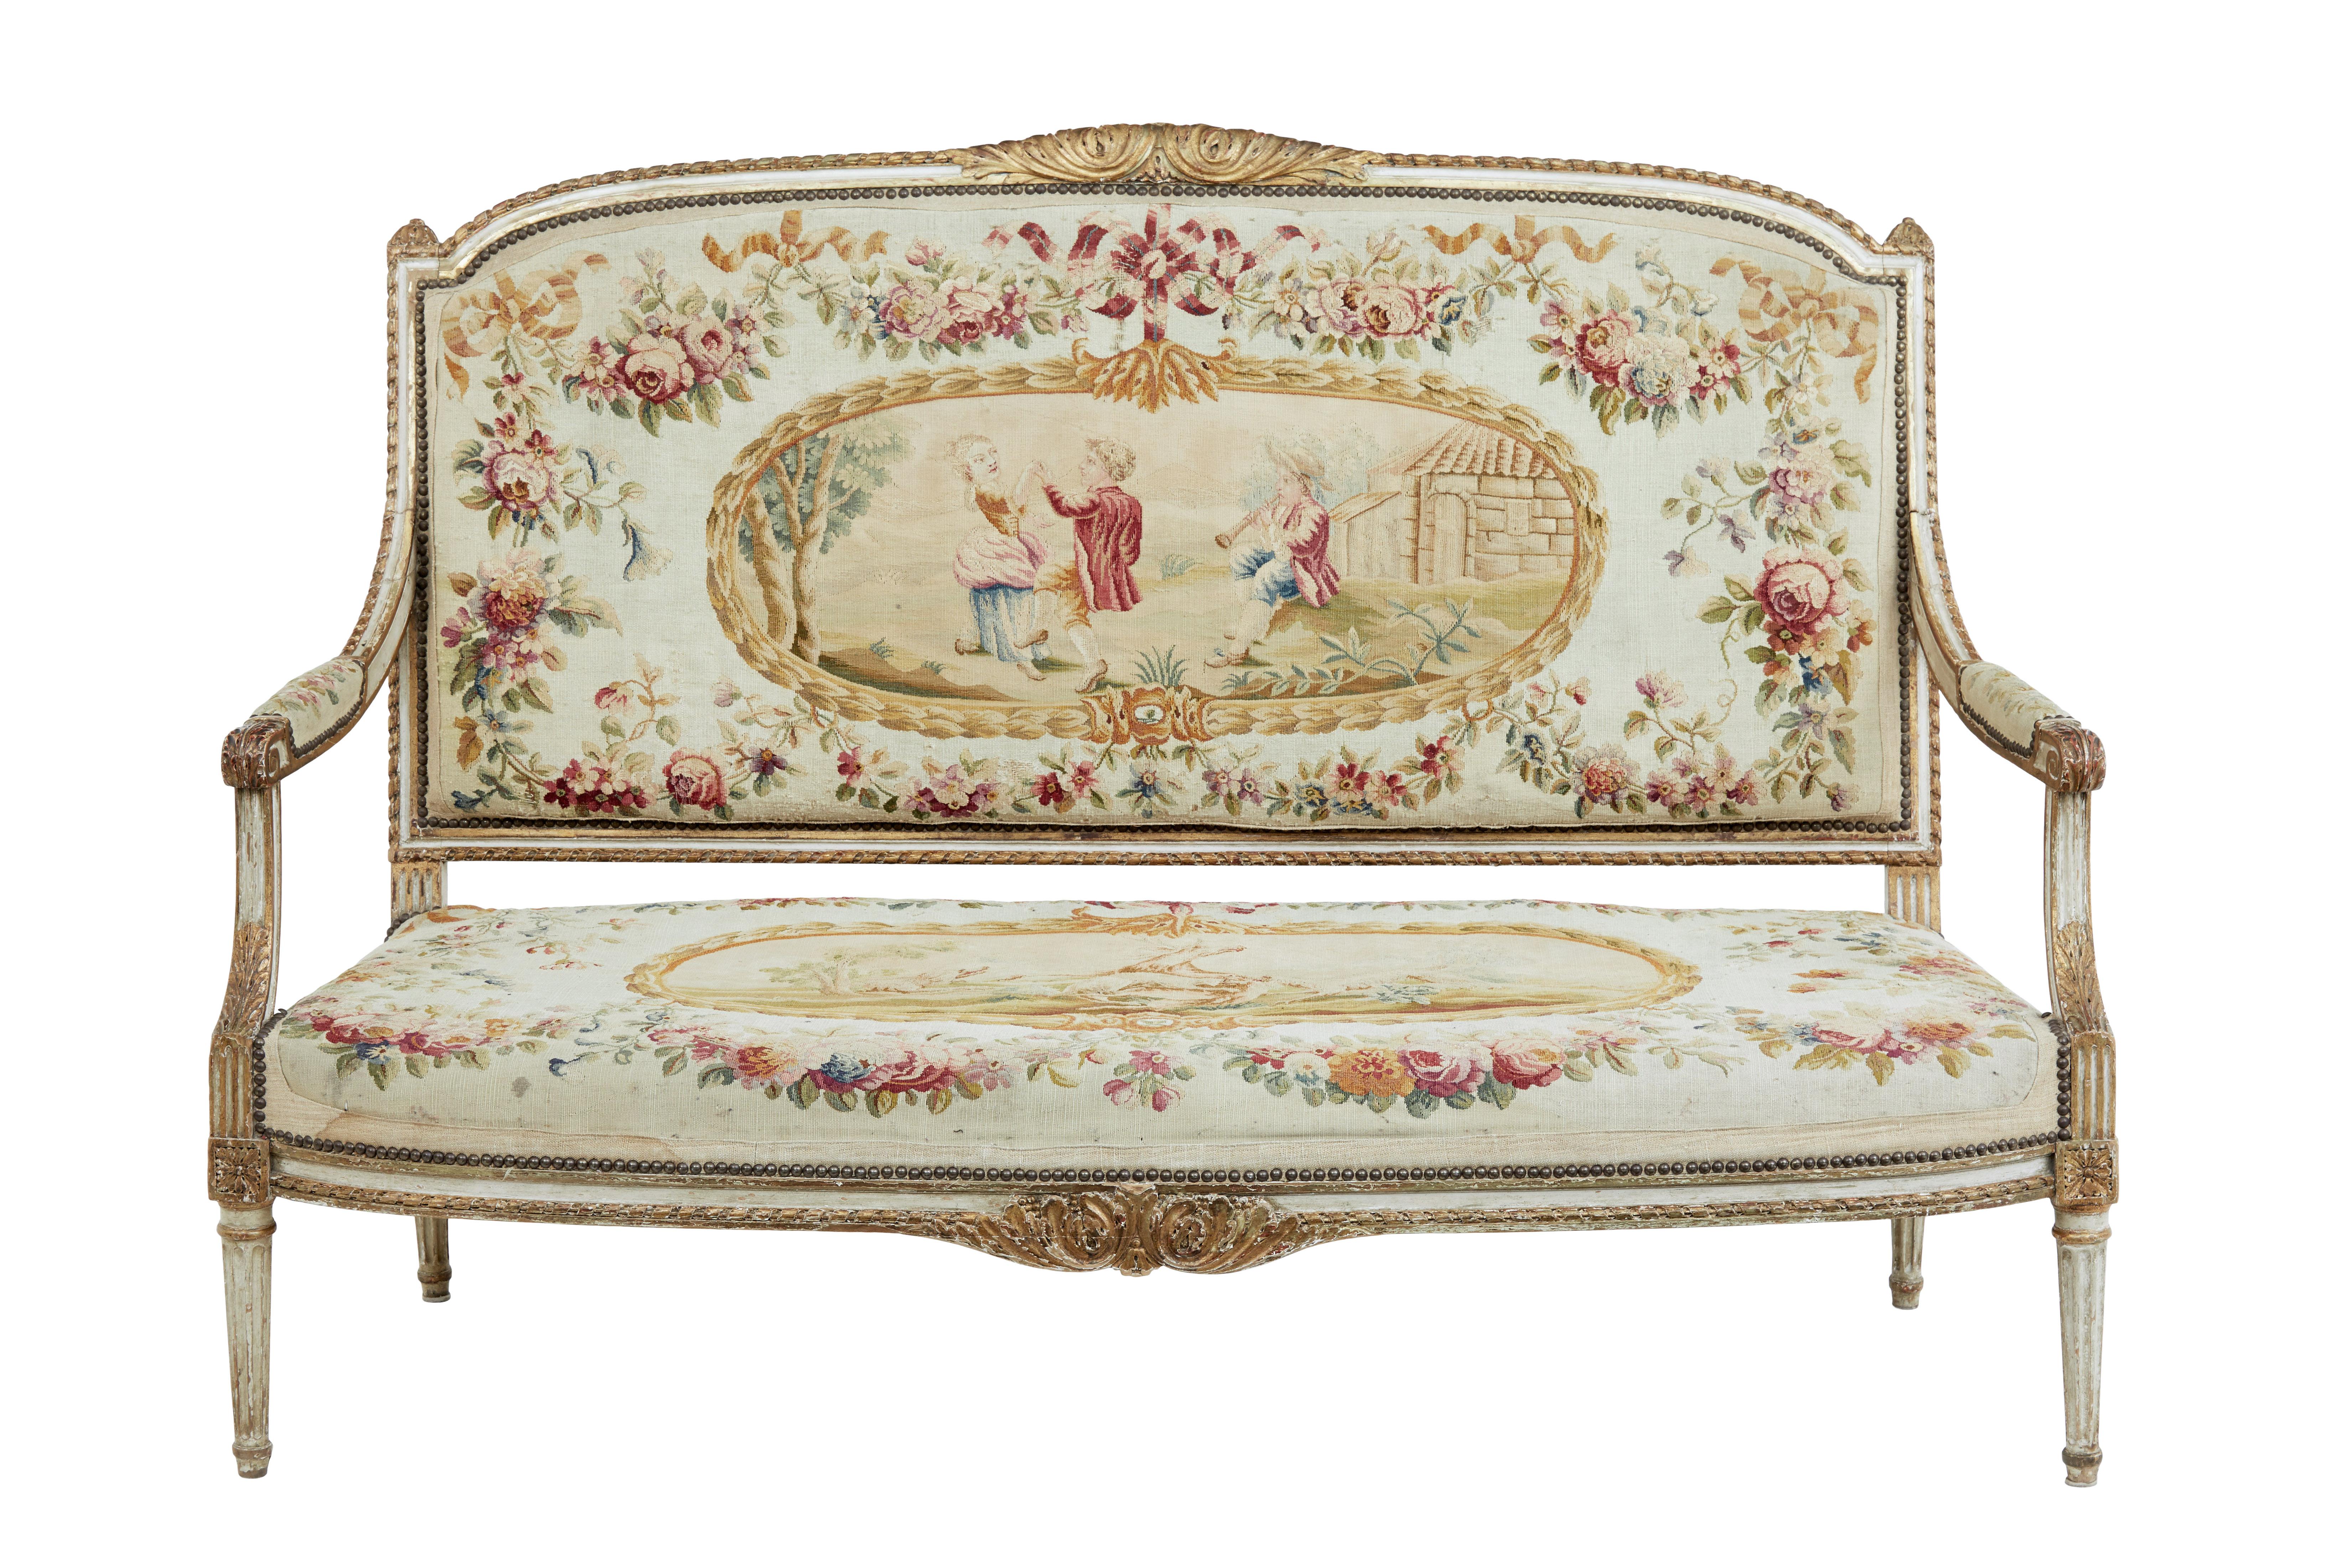 Fine quality louis philippe I period 5 piece gilt salon suite circa 1830.

We are pleased to offer this superb quality gilt salon suite with original tapestry covering, from the period of louis philippe the first of france.



Carved detailing